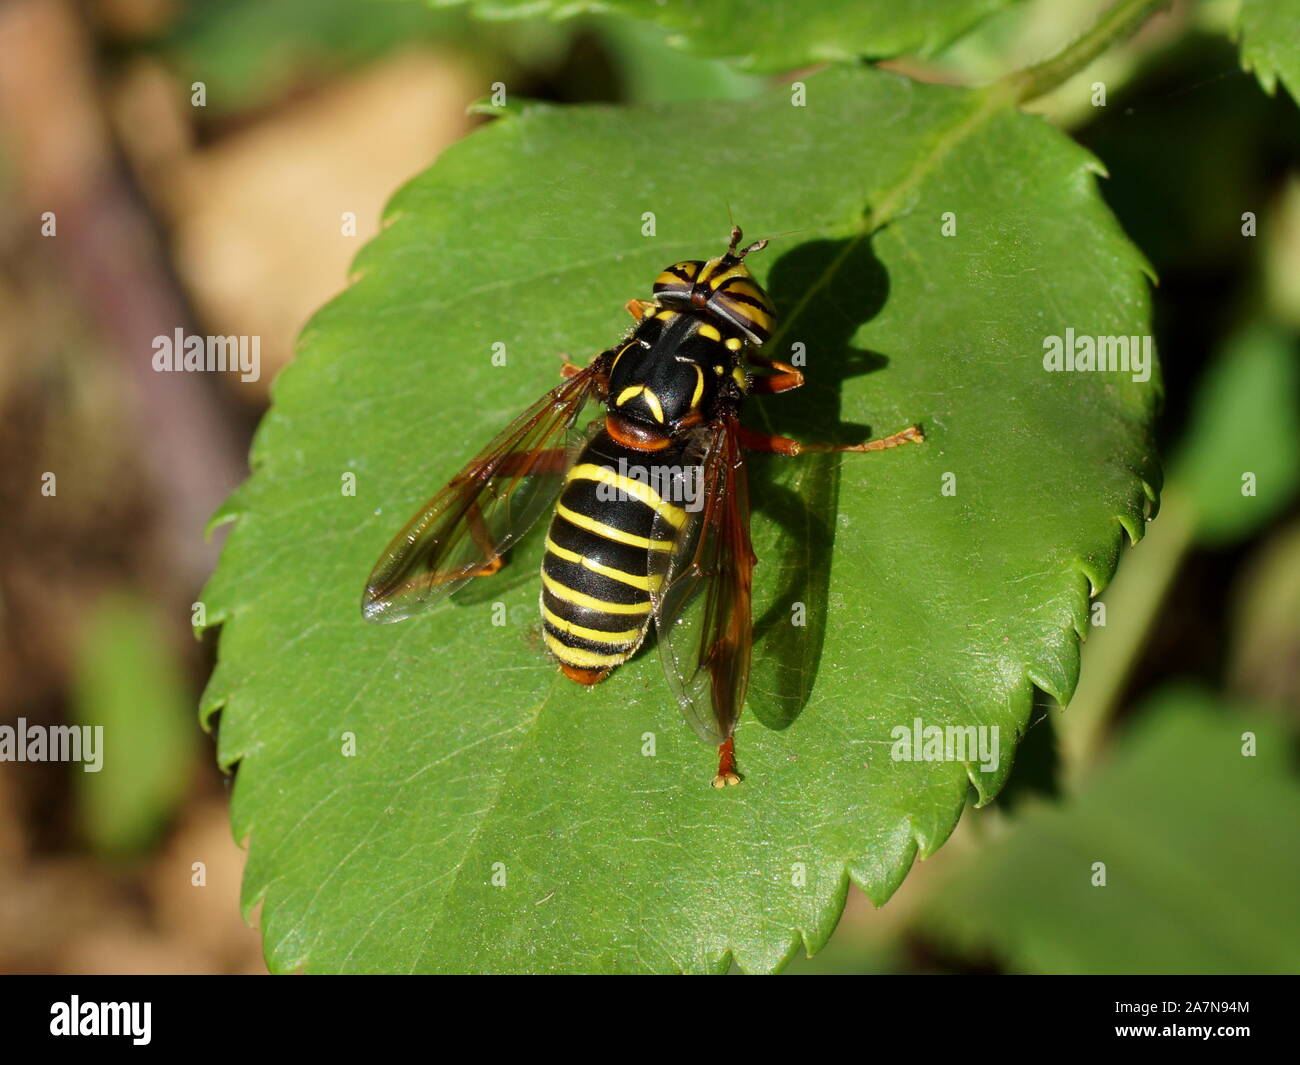 Spilomyia diophthalma. Spilomyia is a genus of hoverflies. Many species in the genus show Batesian mimicry of wasp models. Stock Photo